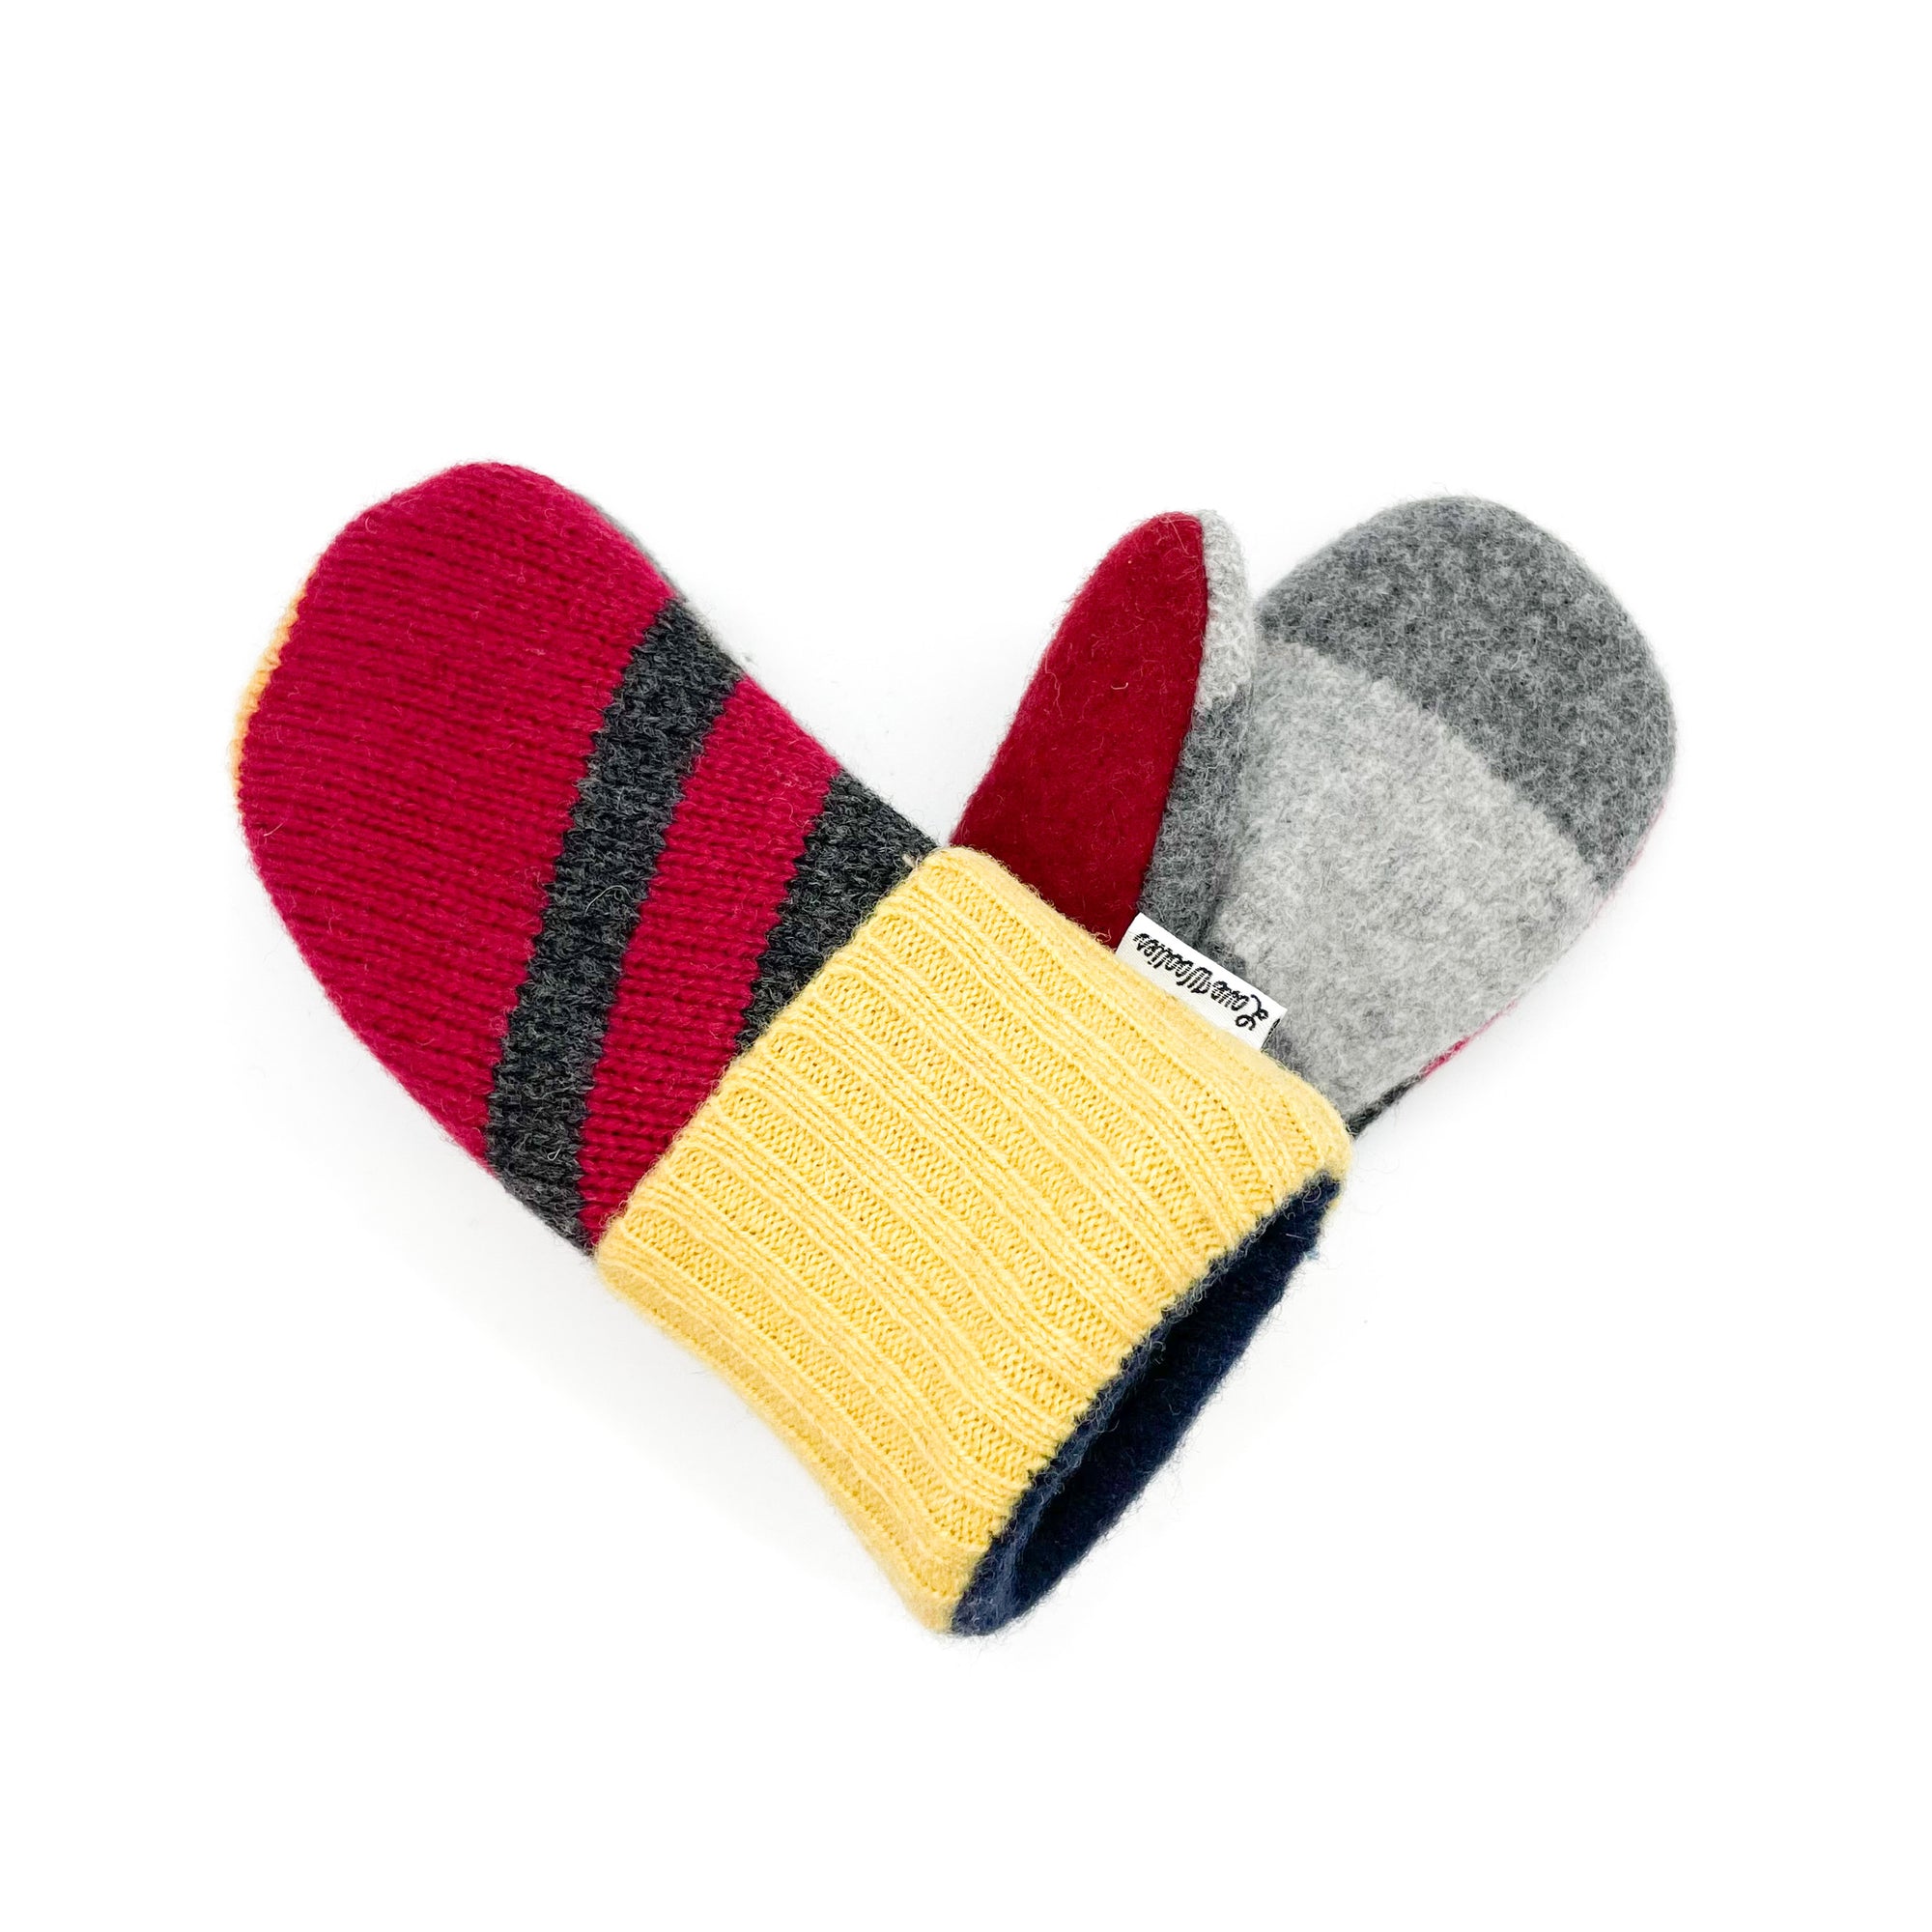 Small Kid's Wool Sweater Mittens | Red Sweater